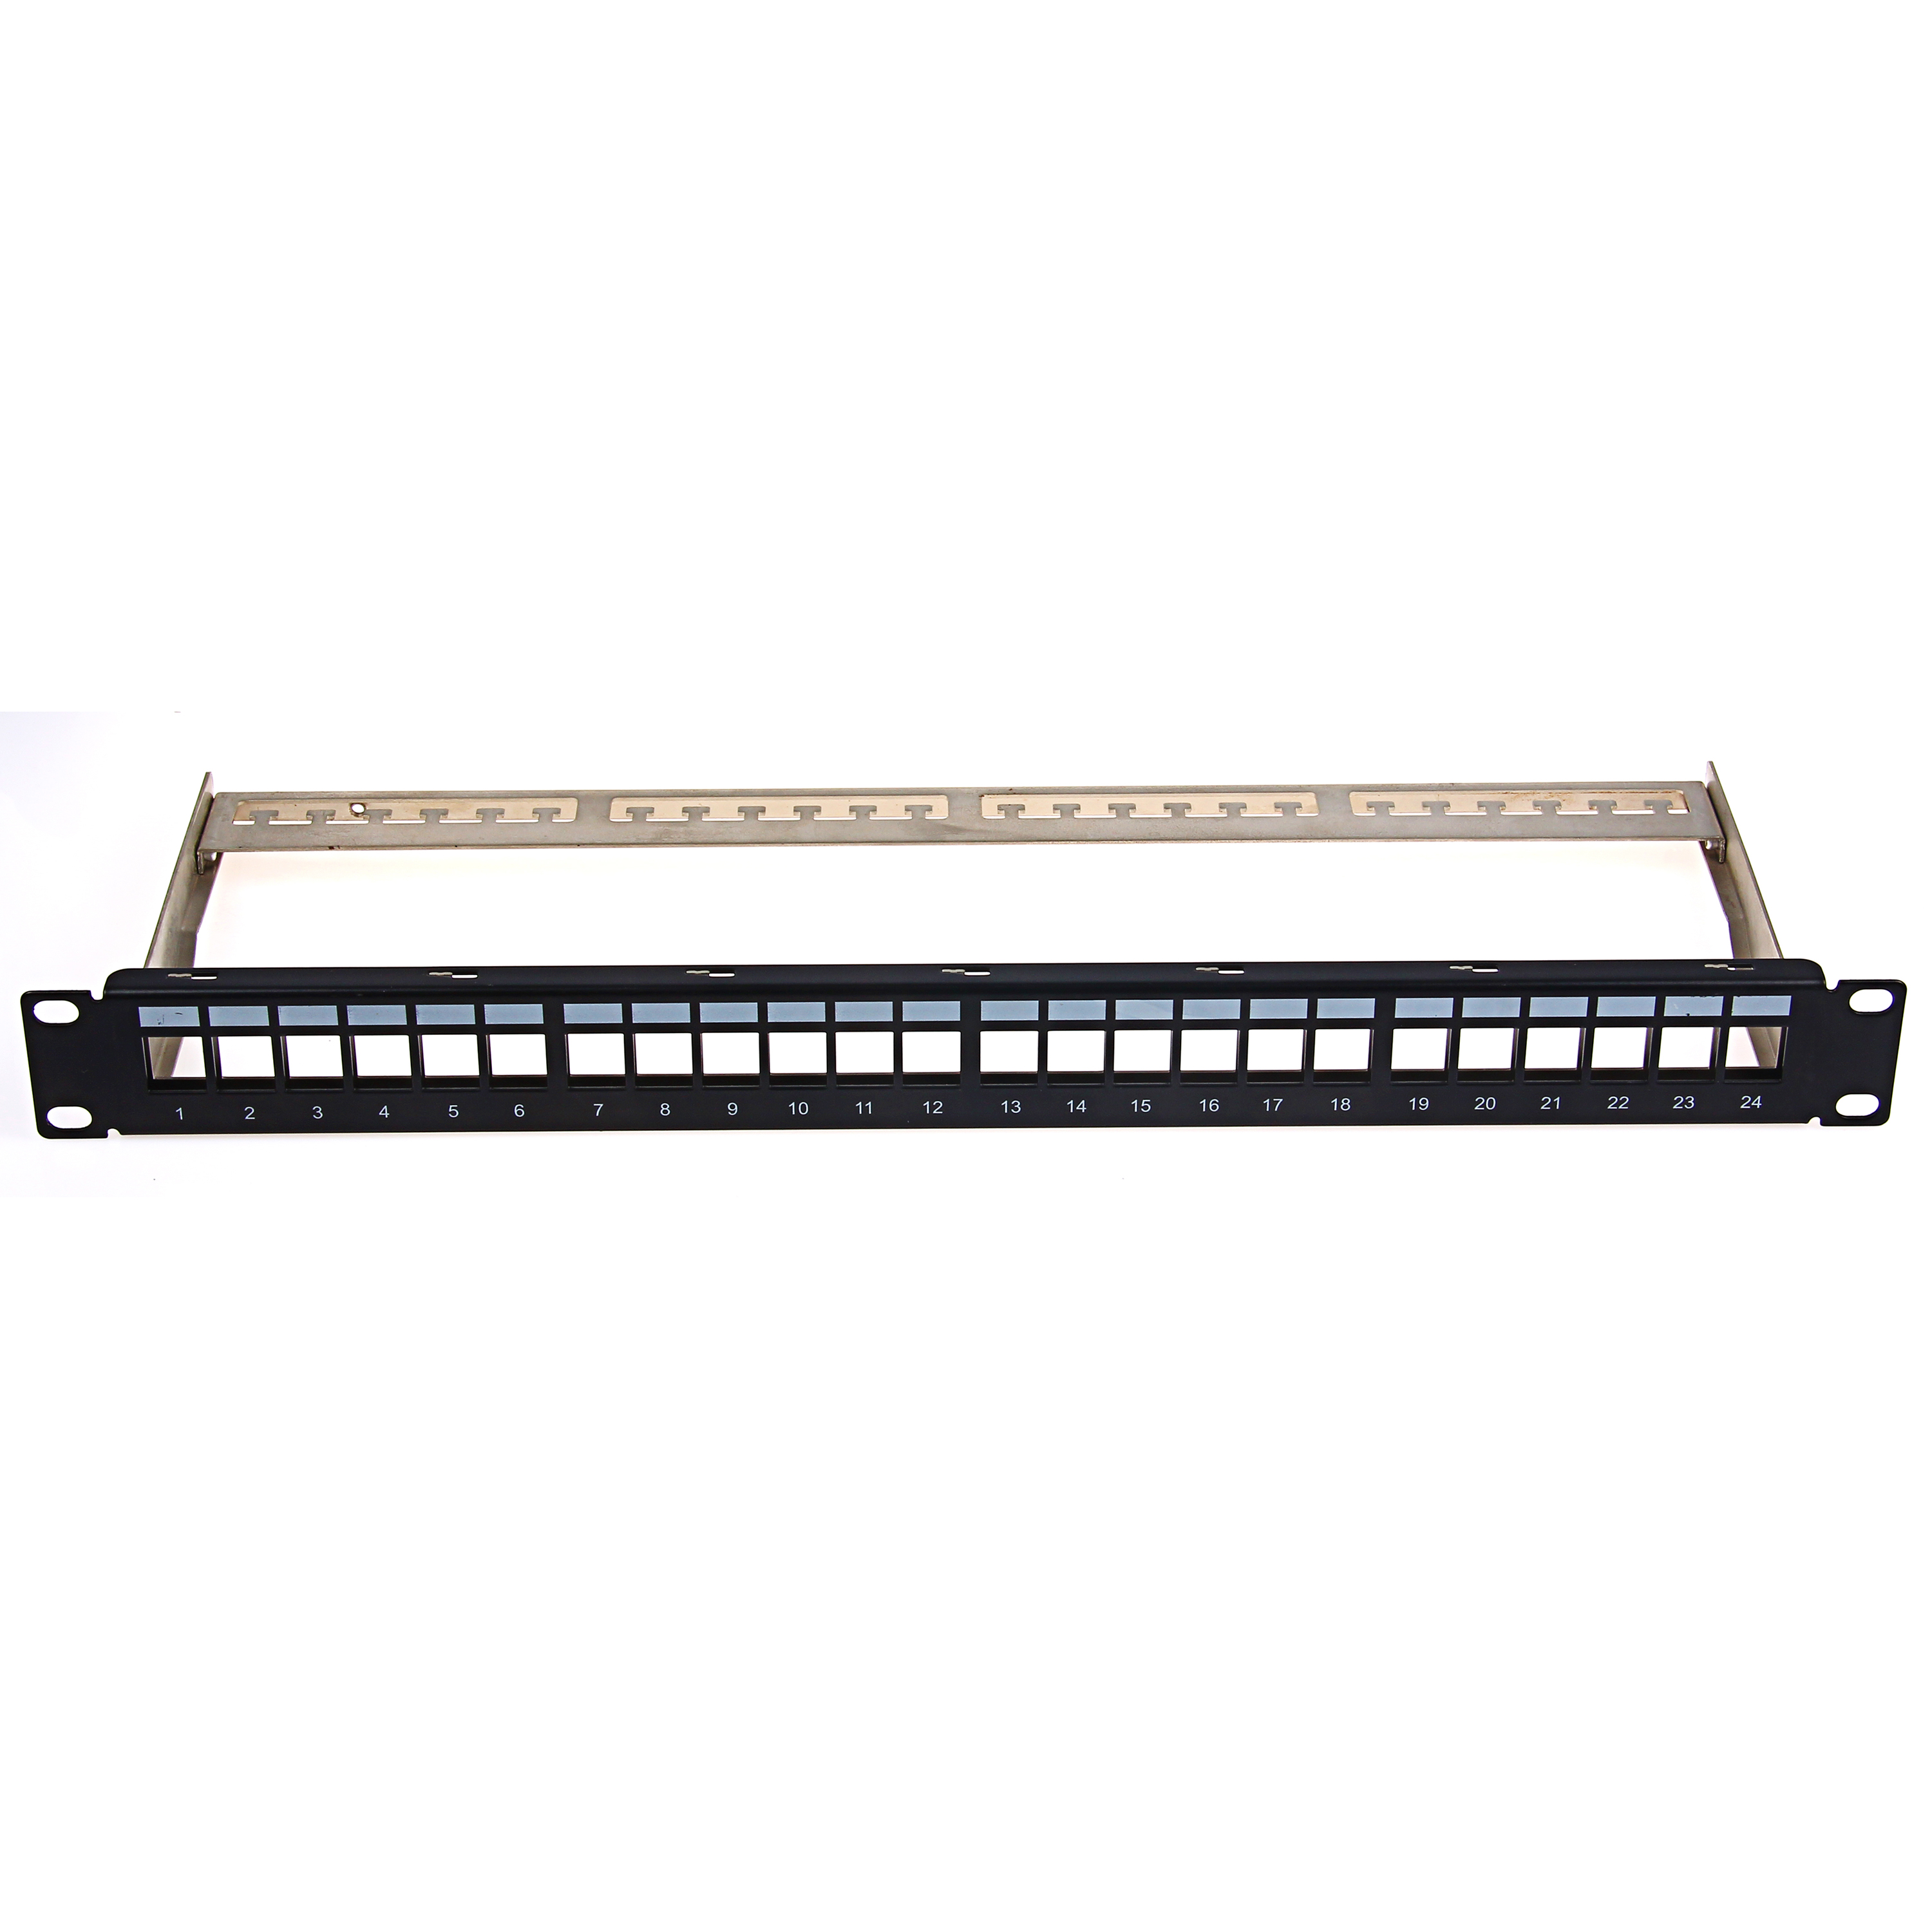 1U 19'' 24 Port FTP Blank Patch Panel With Back Bar (Empty Patch Panel)